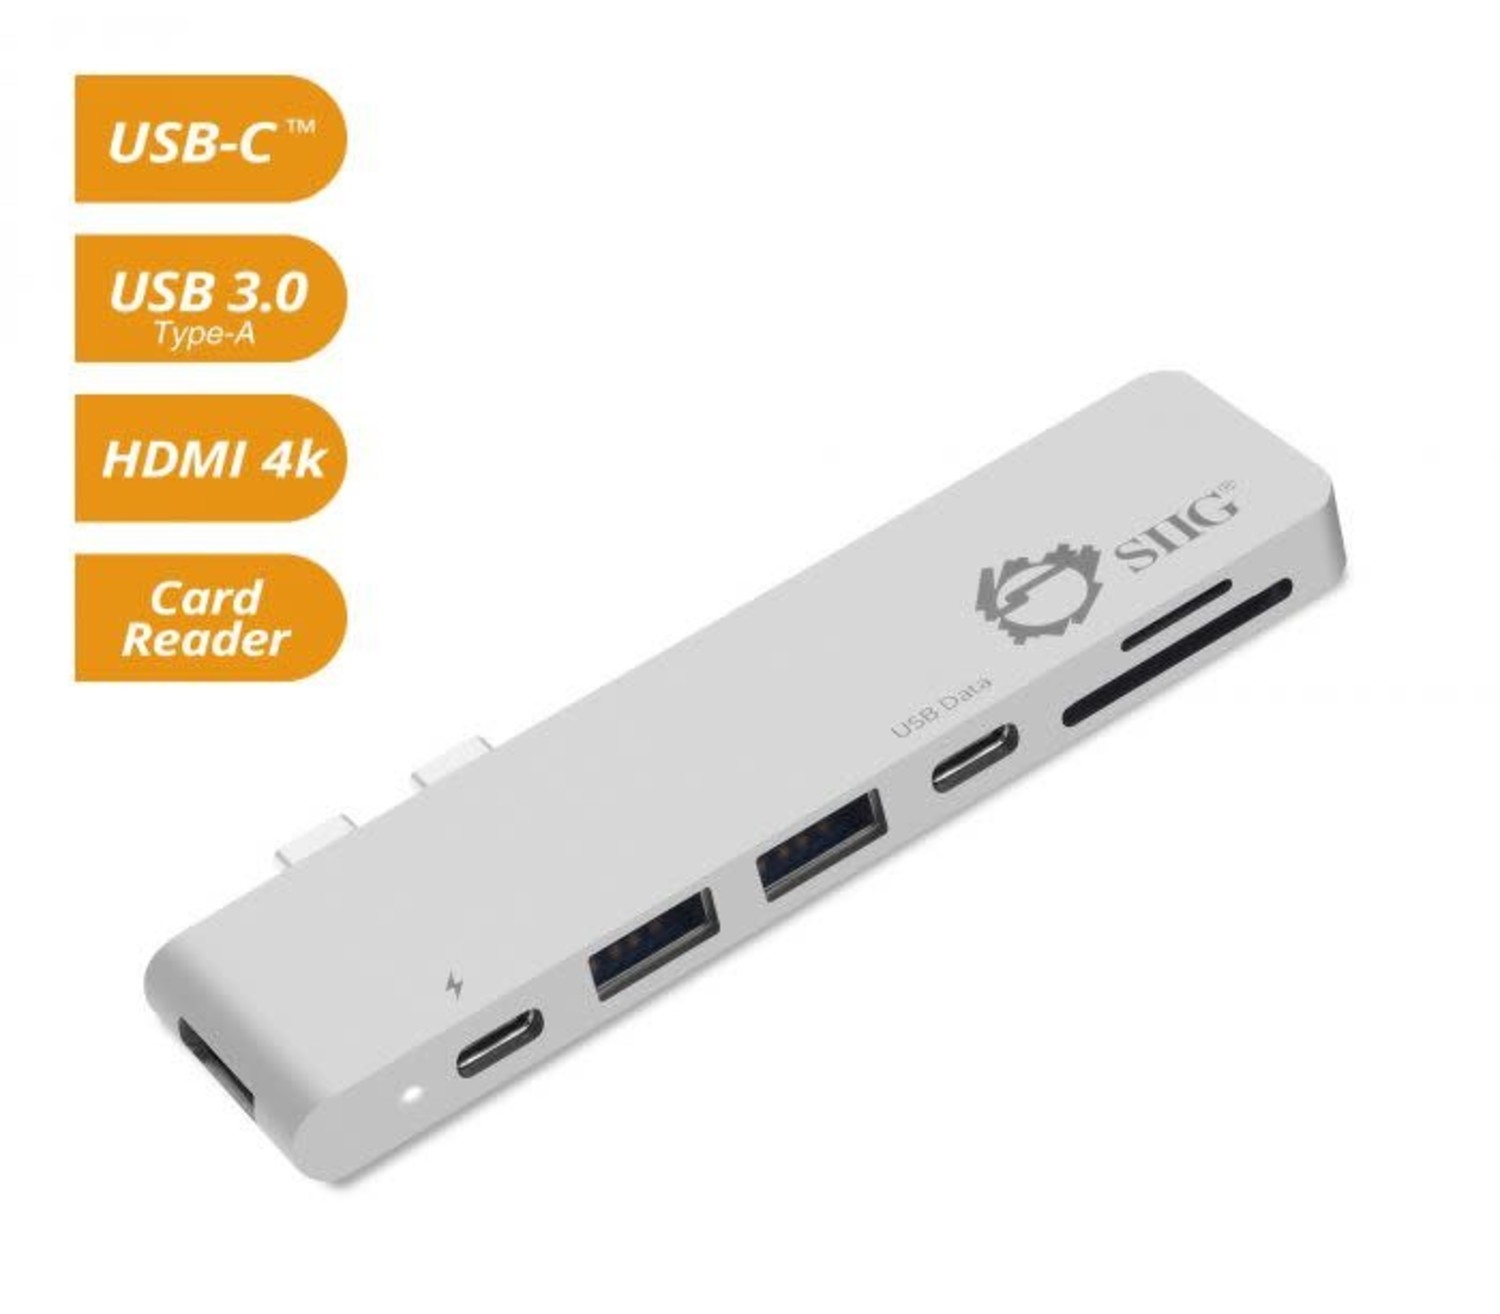 GearIT USB-C to HDMI Cable, [Thunderbolt 3 Port Compatible] USB Type-C